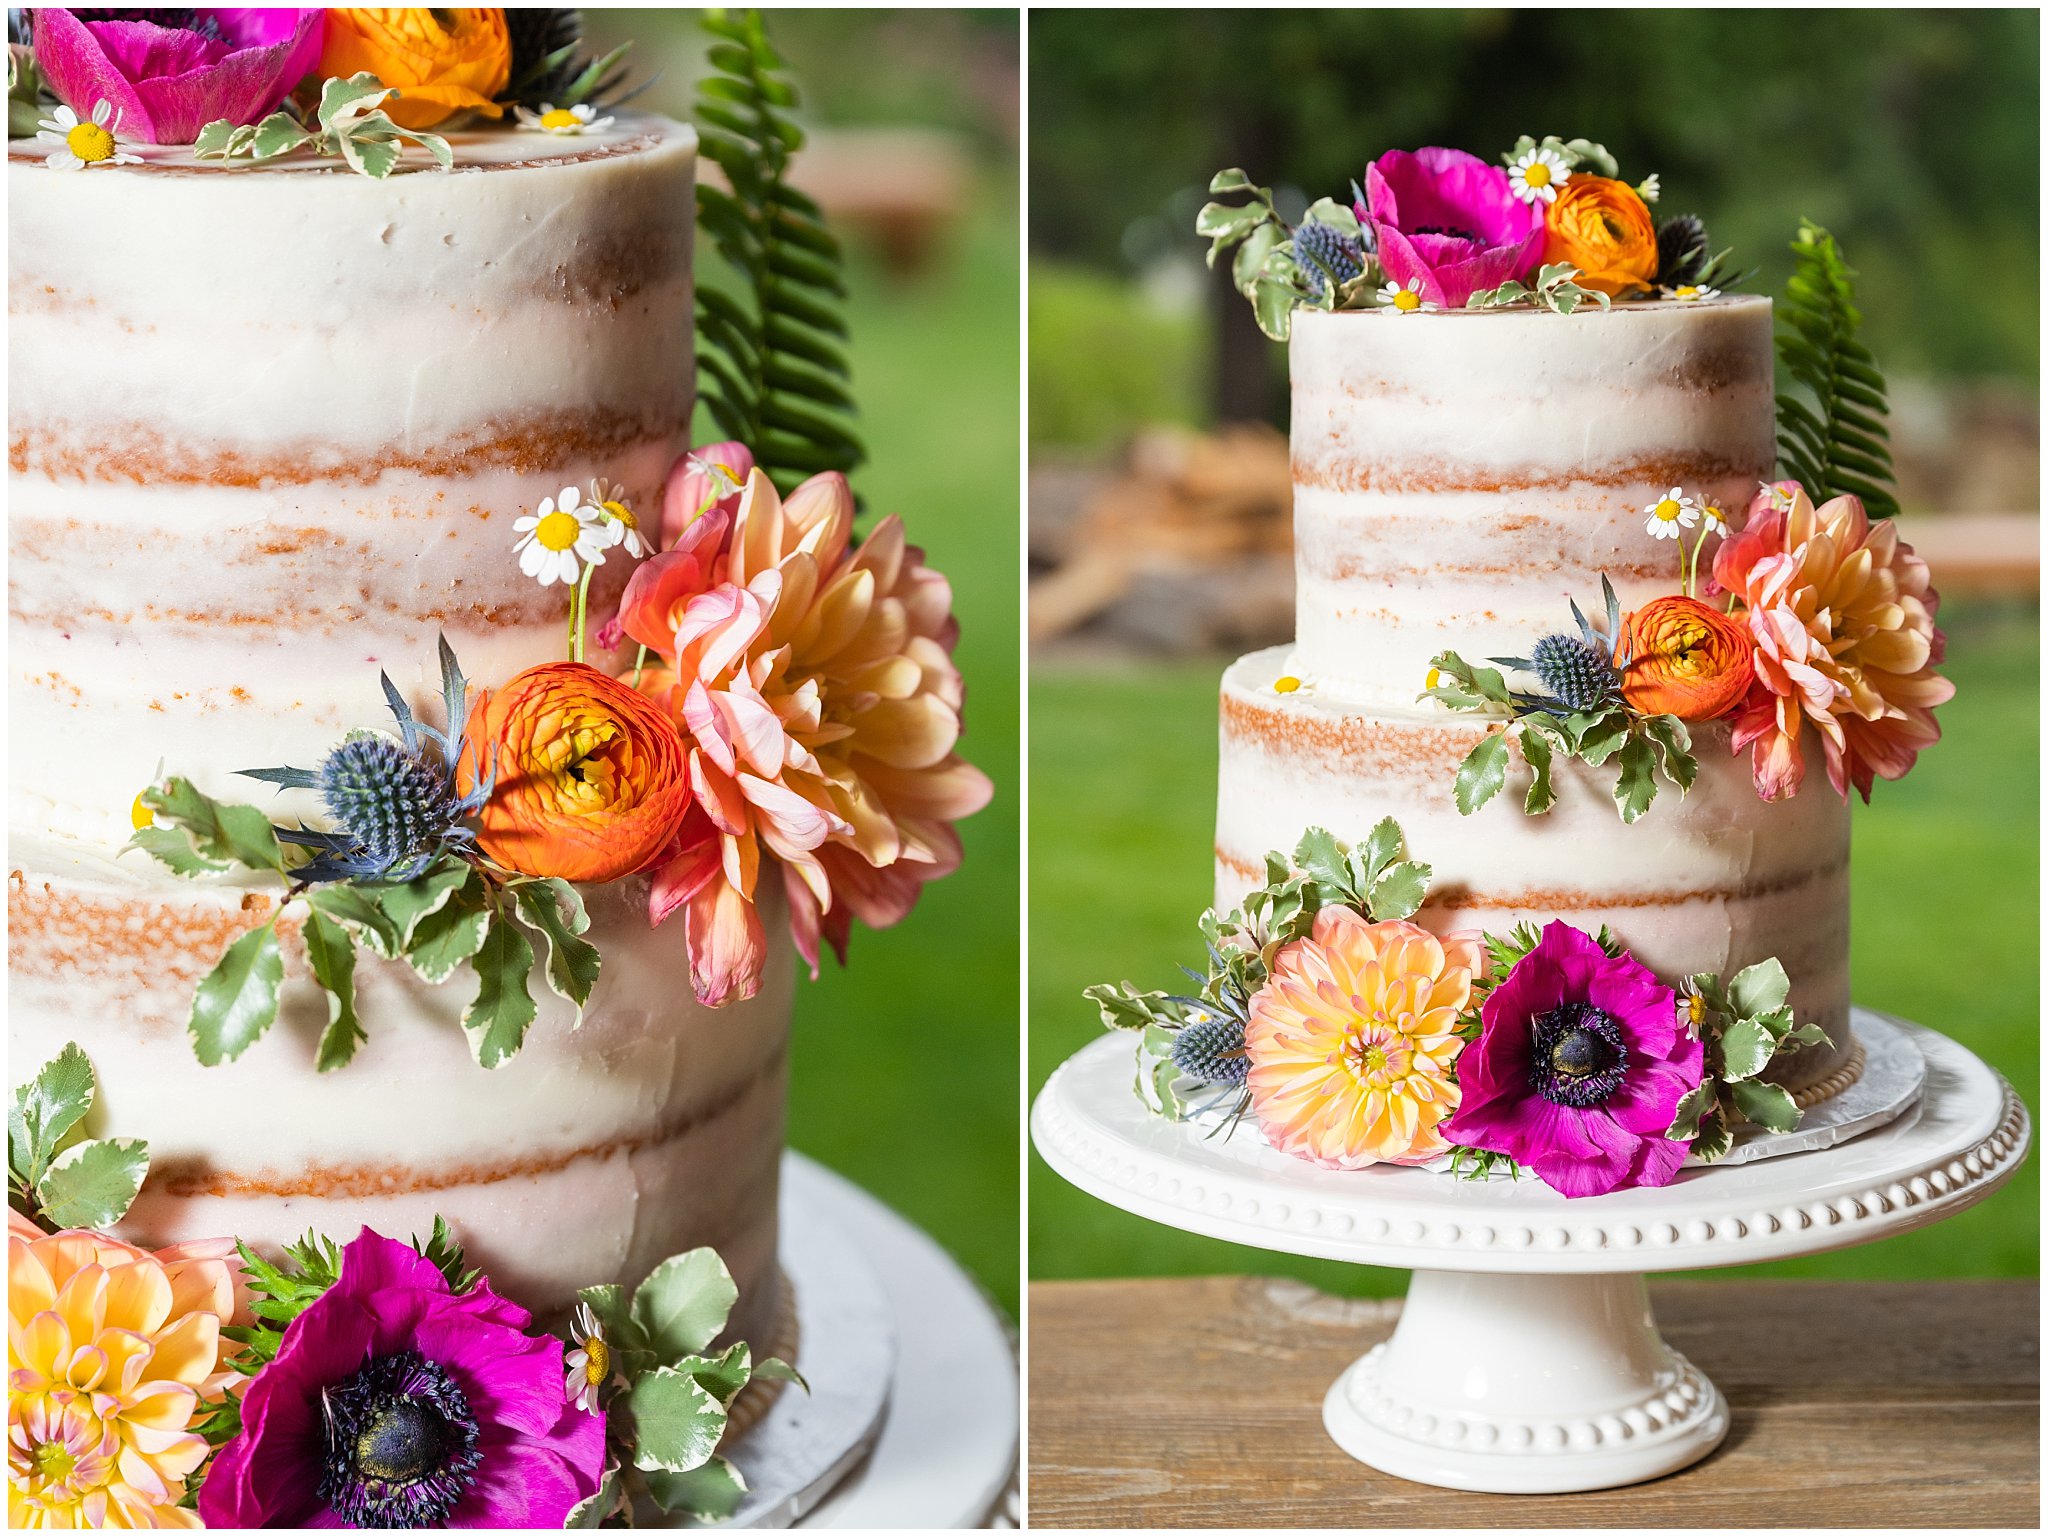 Wildflower naked cake for wedding in the Montana forest and near a pond | Mountainside Weddings Kalispell Montana Destination Wedding | Jessie and Dallin Photography